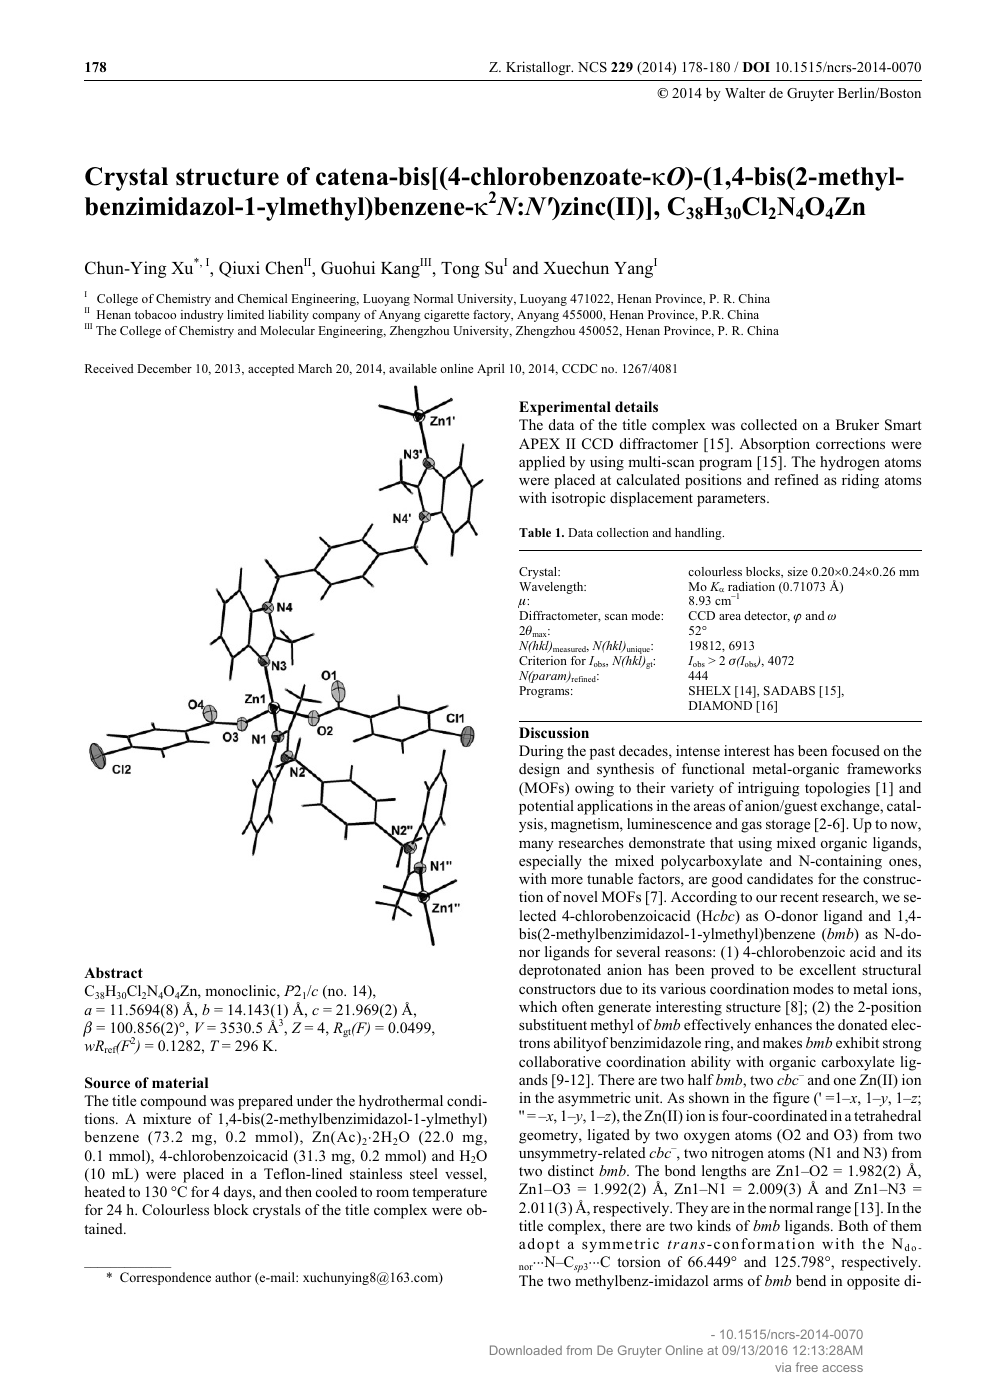 Crystal Structure Of Catena Bis 4 Chlorobenzoate Ko 1 4 Bis 2 Methylbenzimidazol 1 Ylmethyl Benzene K2n N Zinc Ii C38h30cl2n4o4zn Topic Of Research Paper In Chemical Sciences Download Scholarly Article Pdf And Read For Free On Cyberleninka